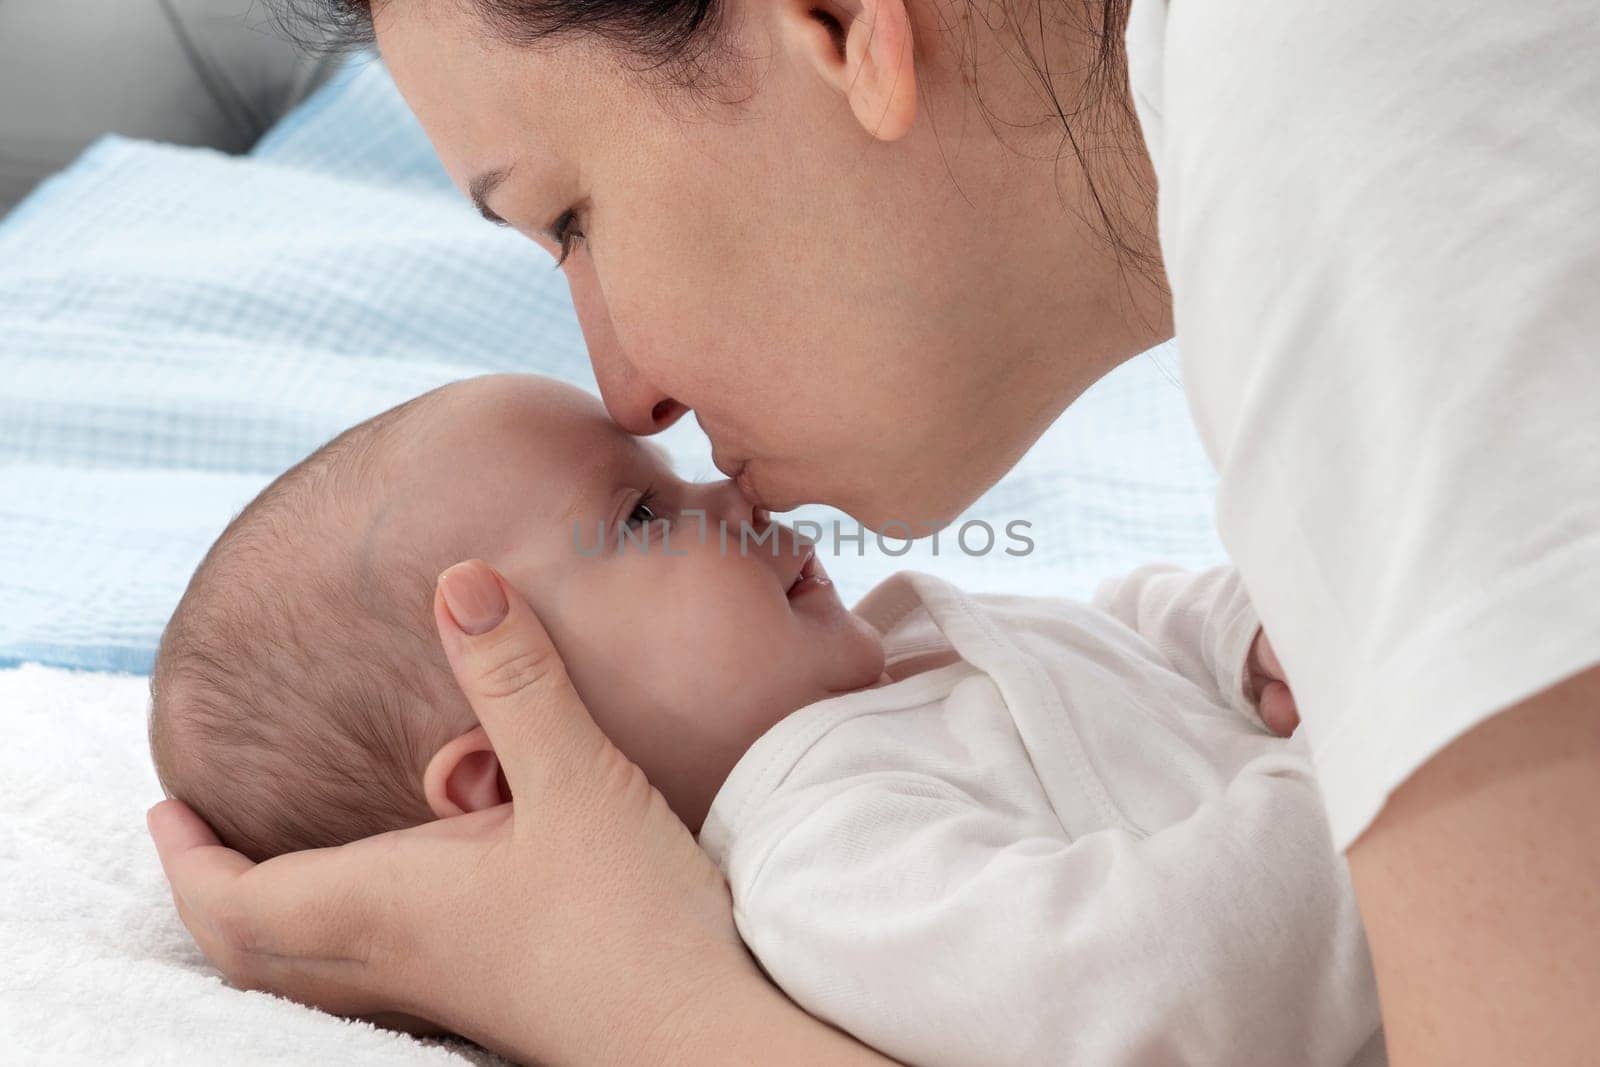 The woman lovingly kissed her babys nose, a comforting gesture of happiness and love, as they